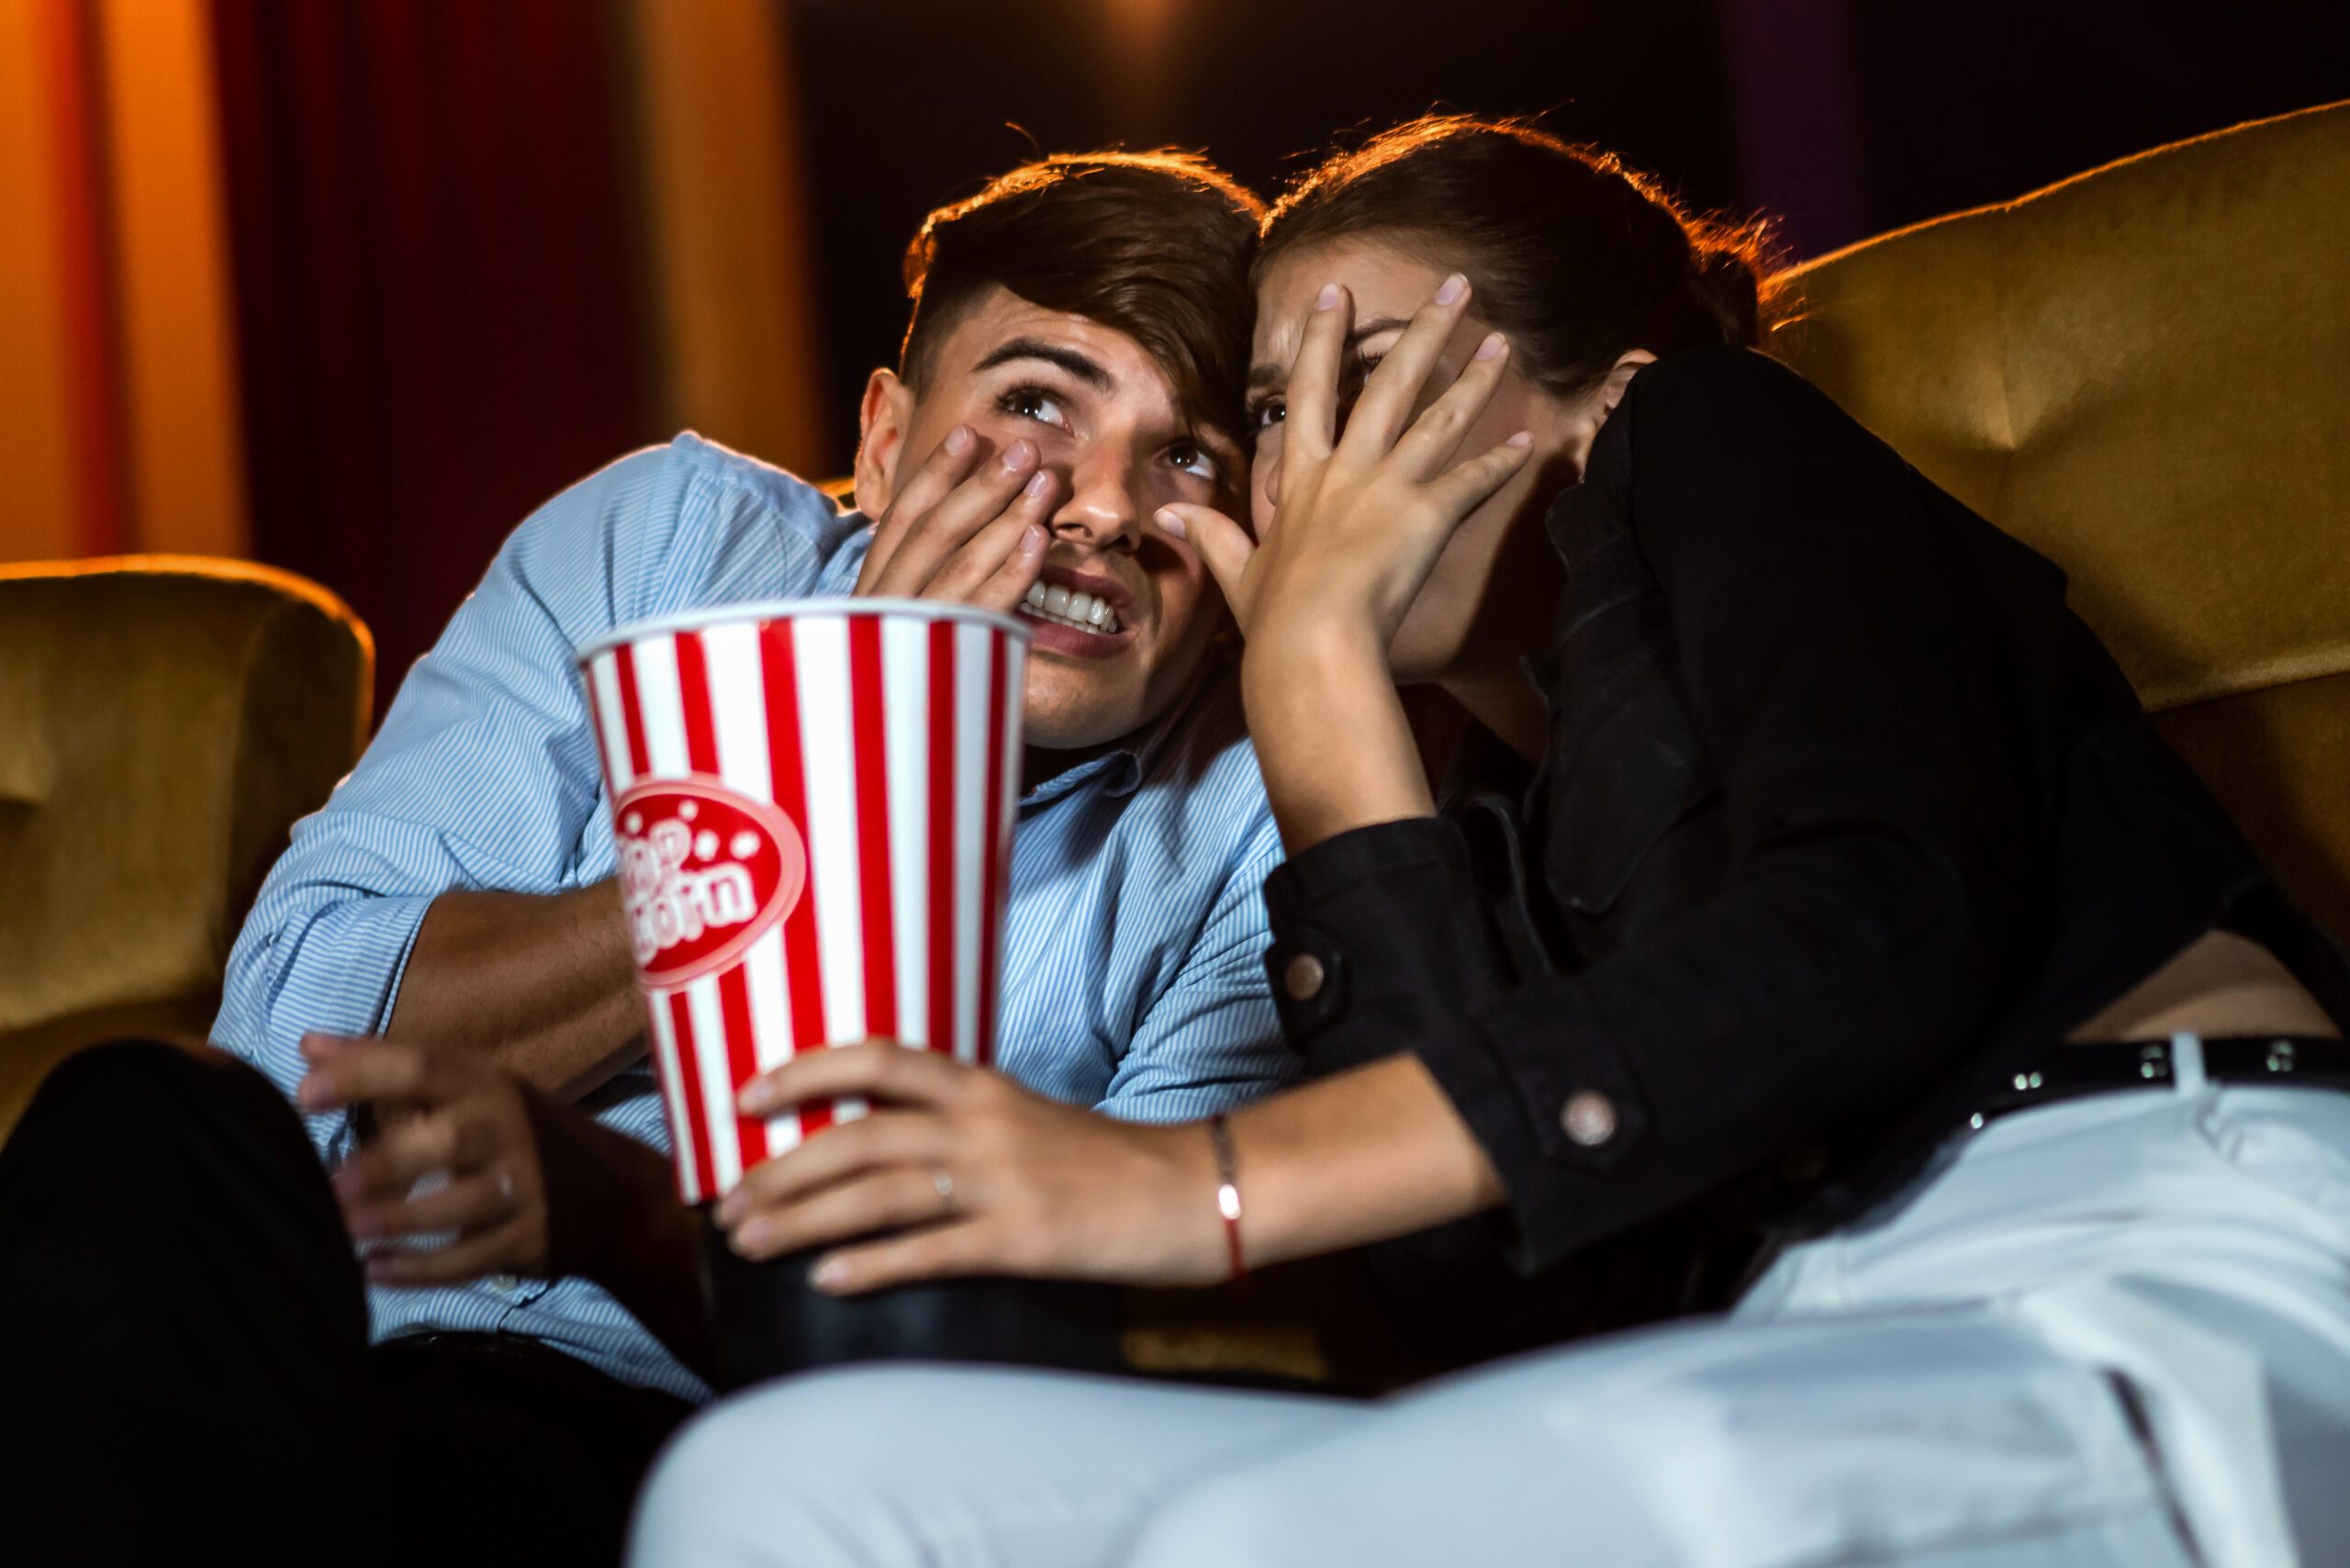 A couple watching a movie shock and eyes close in the movie theater cinema.